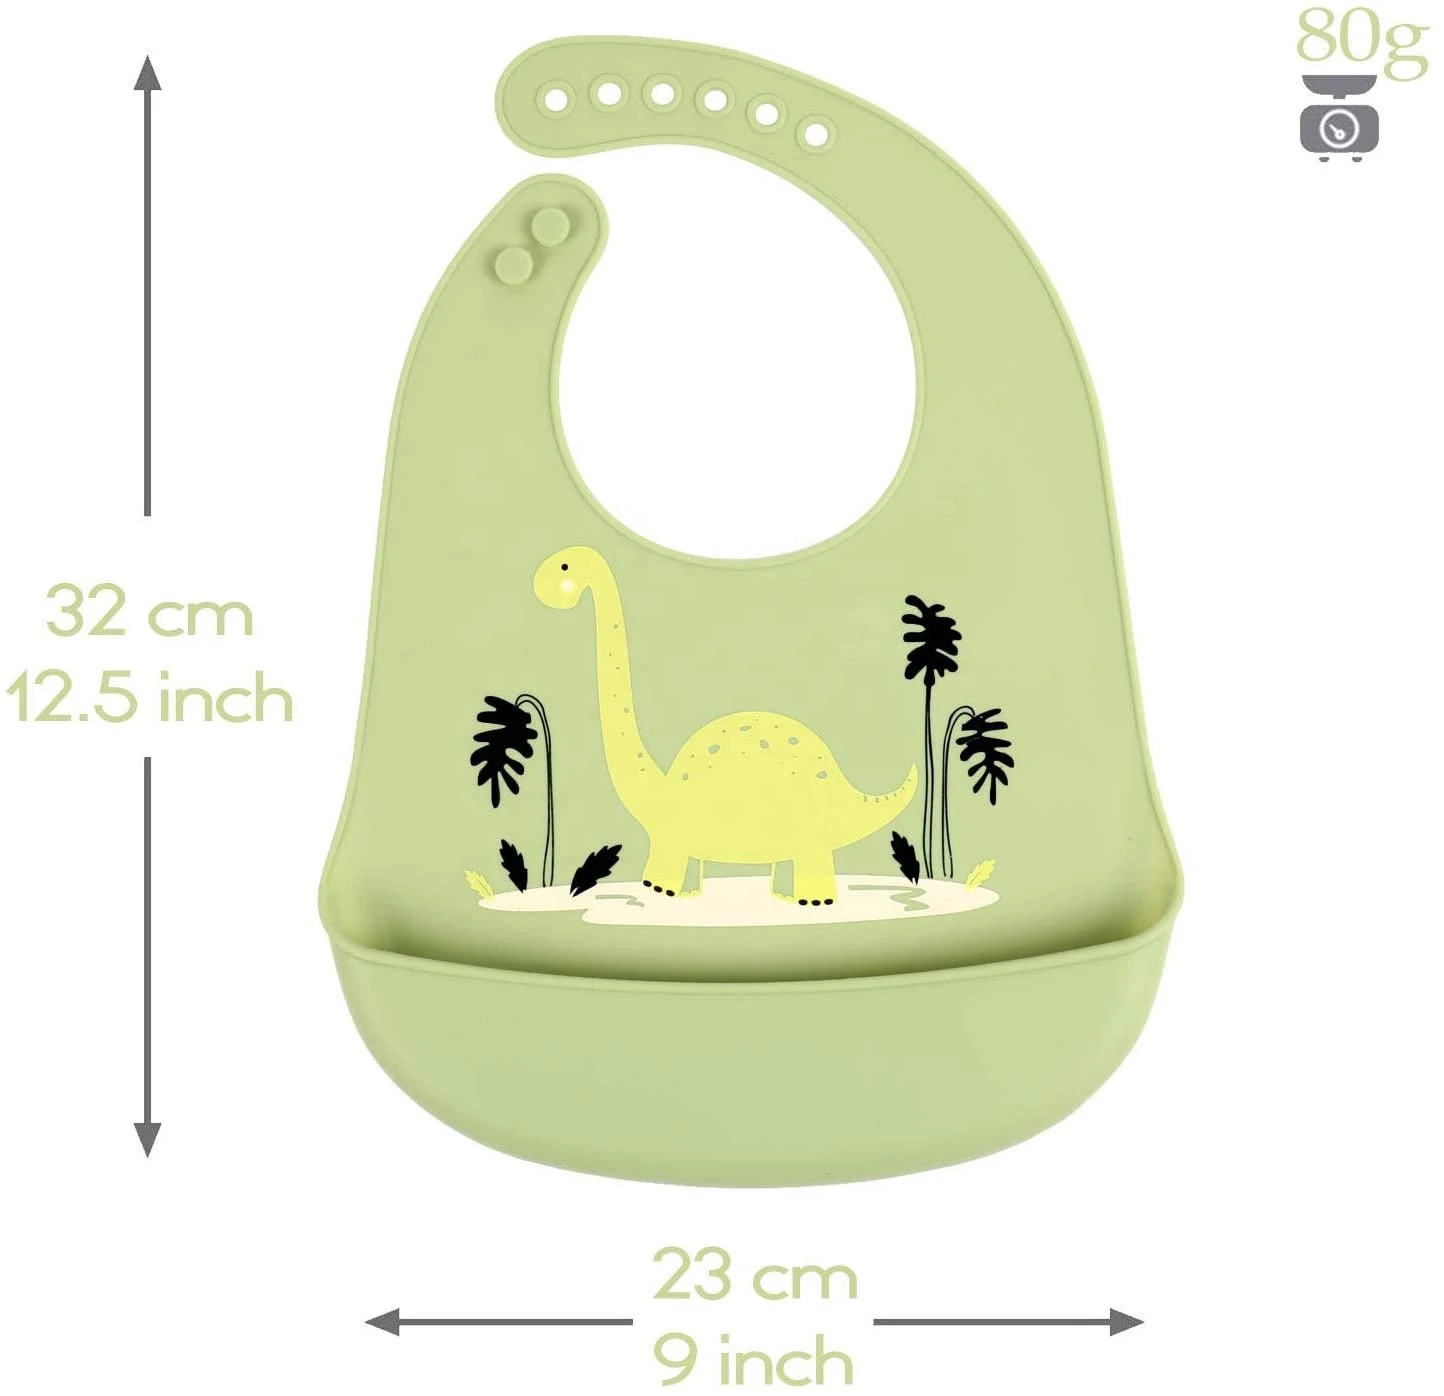 Baby Toddlers Wide Food Crumb Catcher Pocket Super Soft High Quality Silicone Baby Bibs